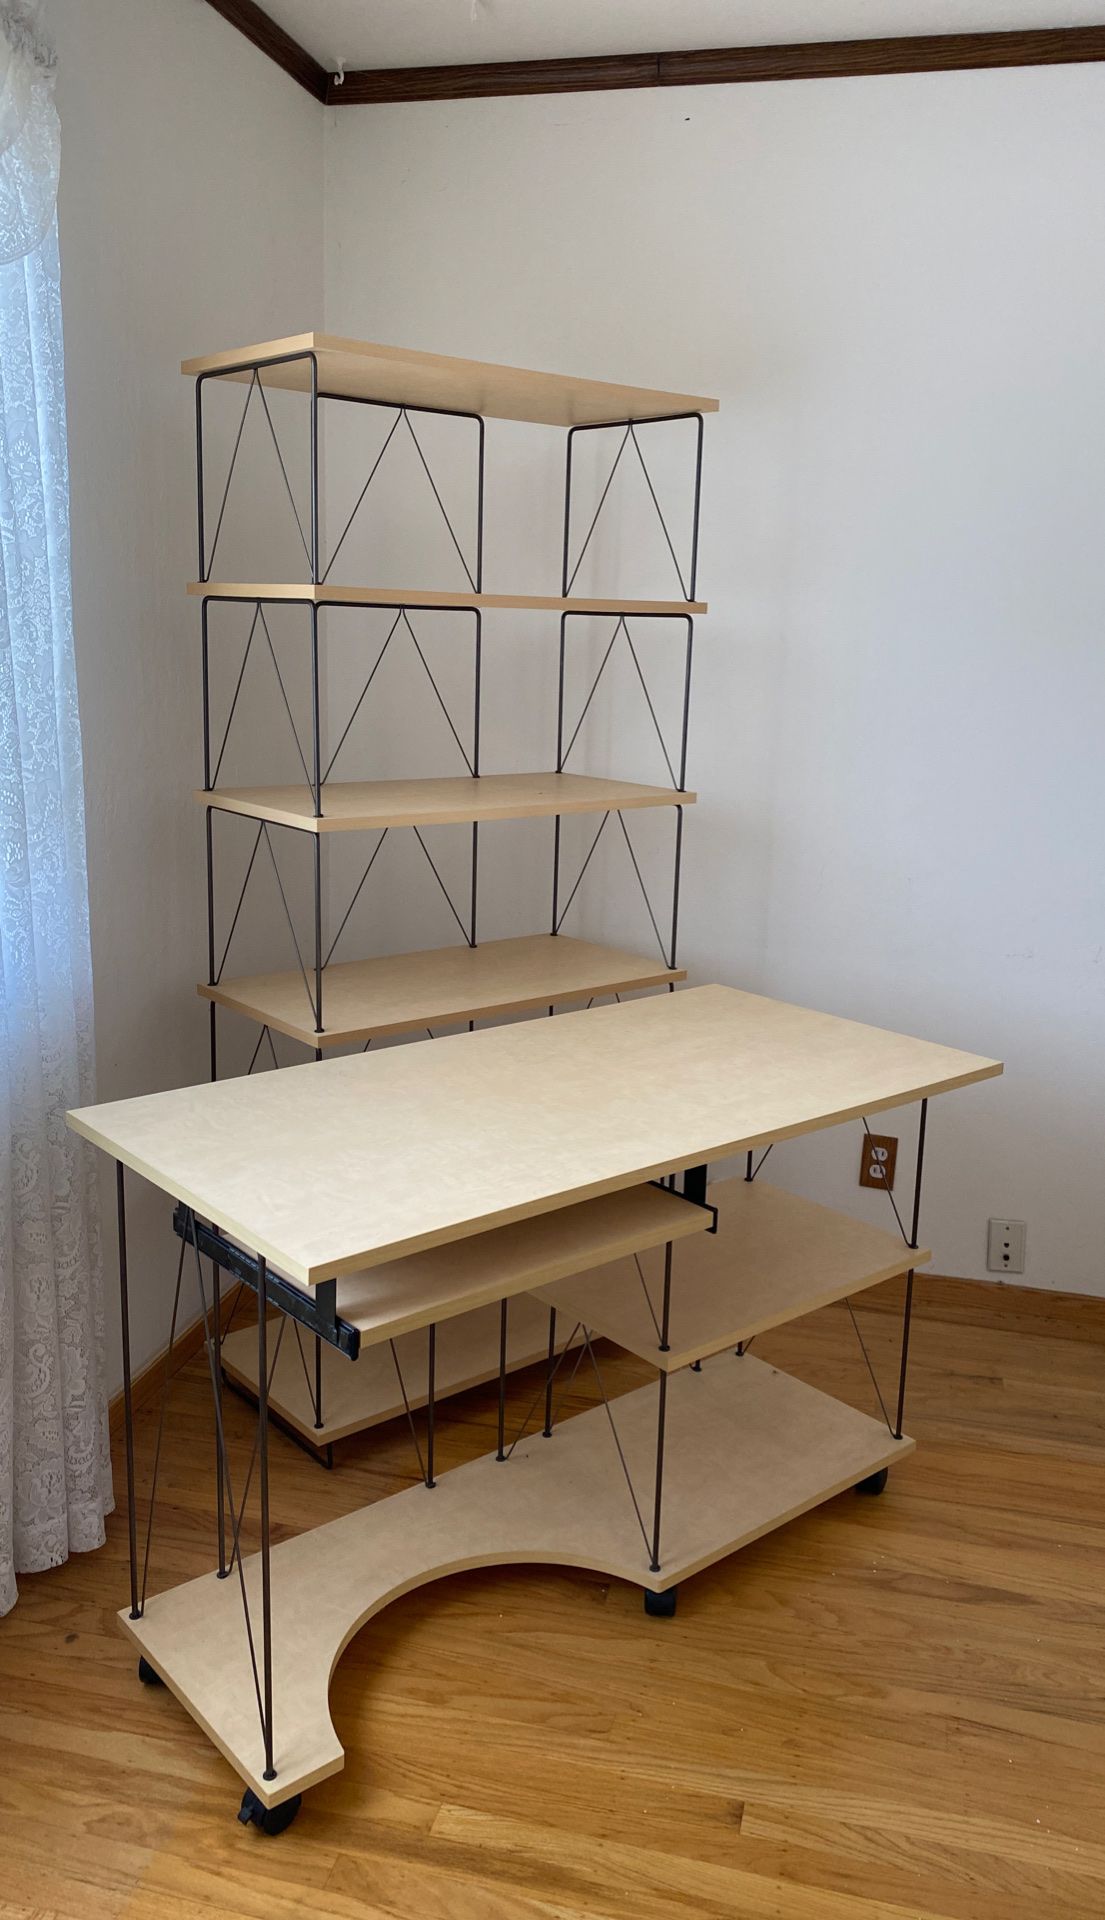 Wonderful desk and bookshelf for sale! Home office perfection!